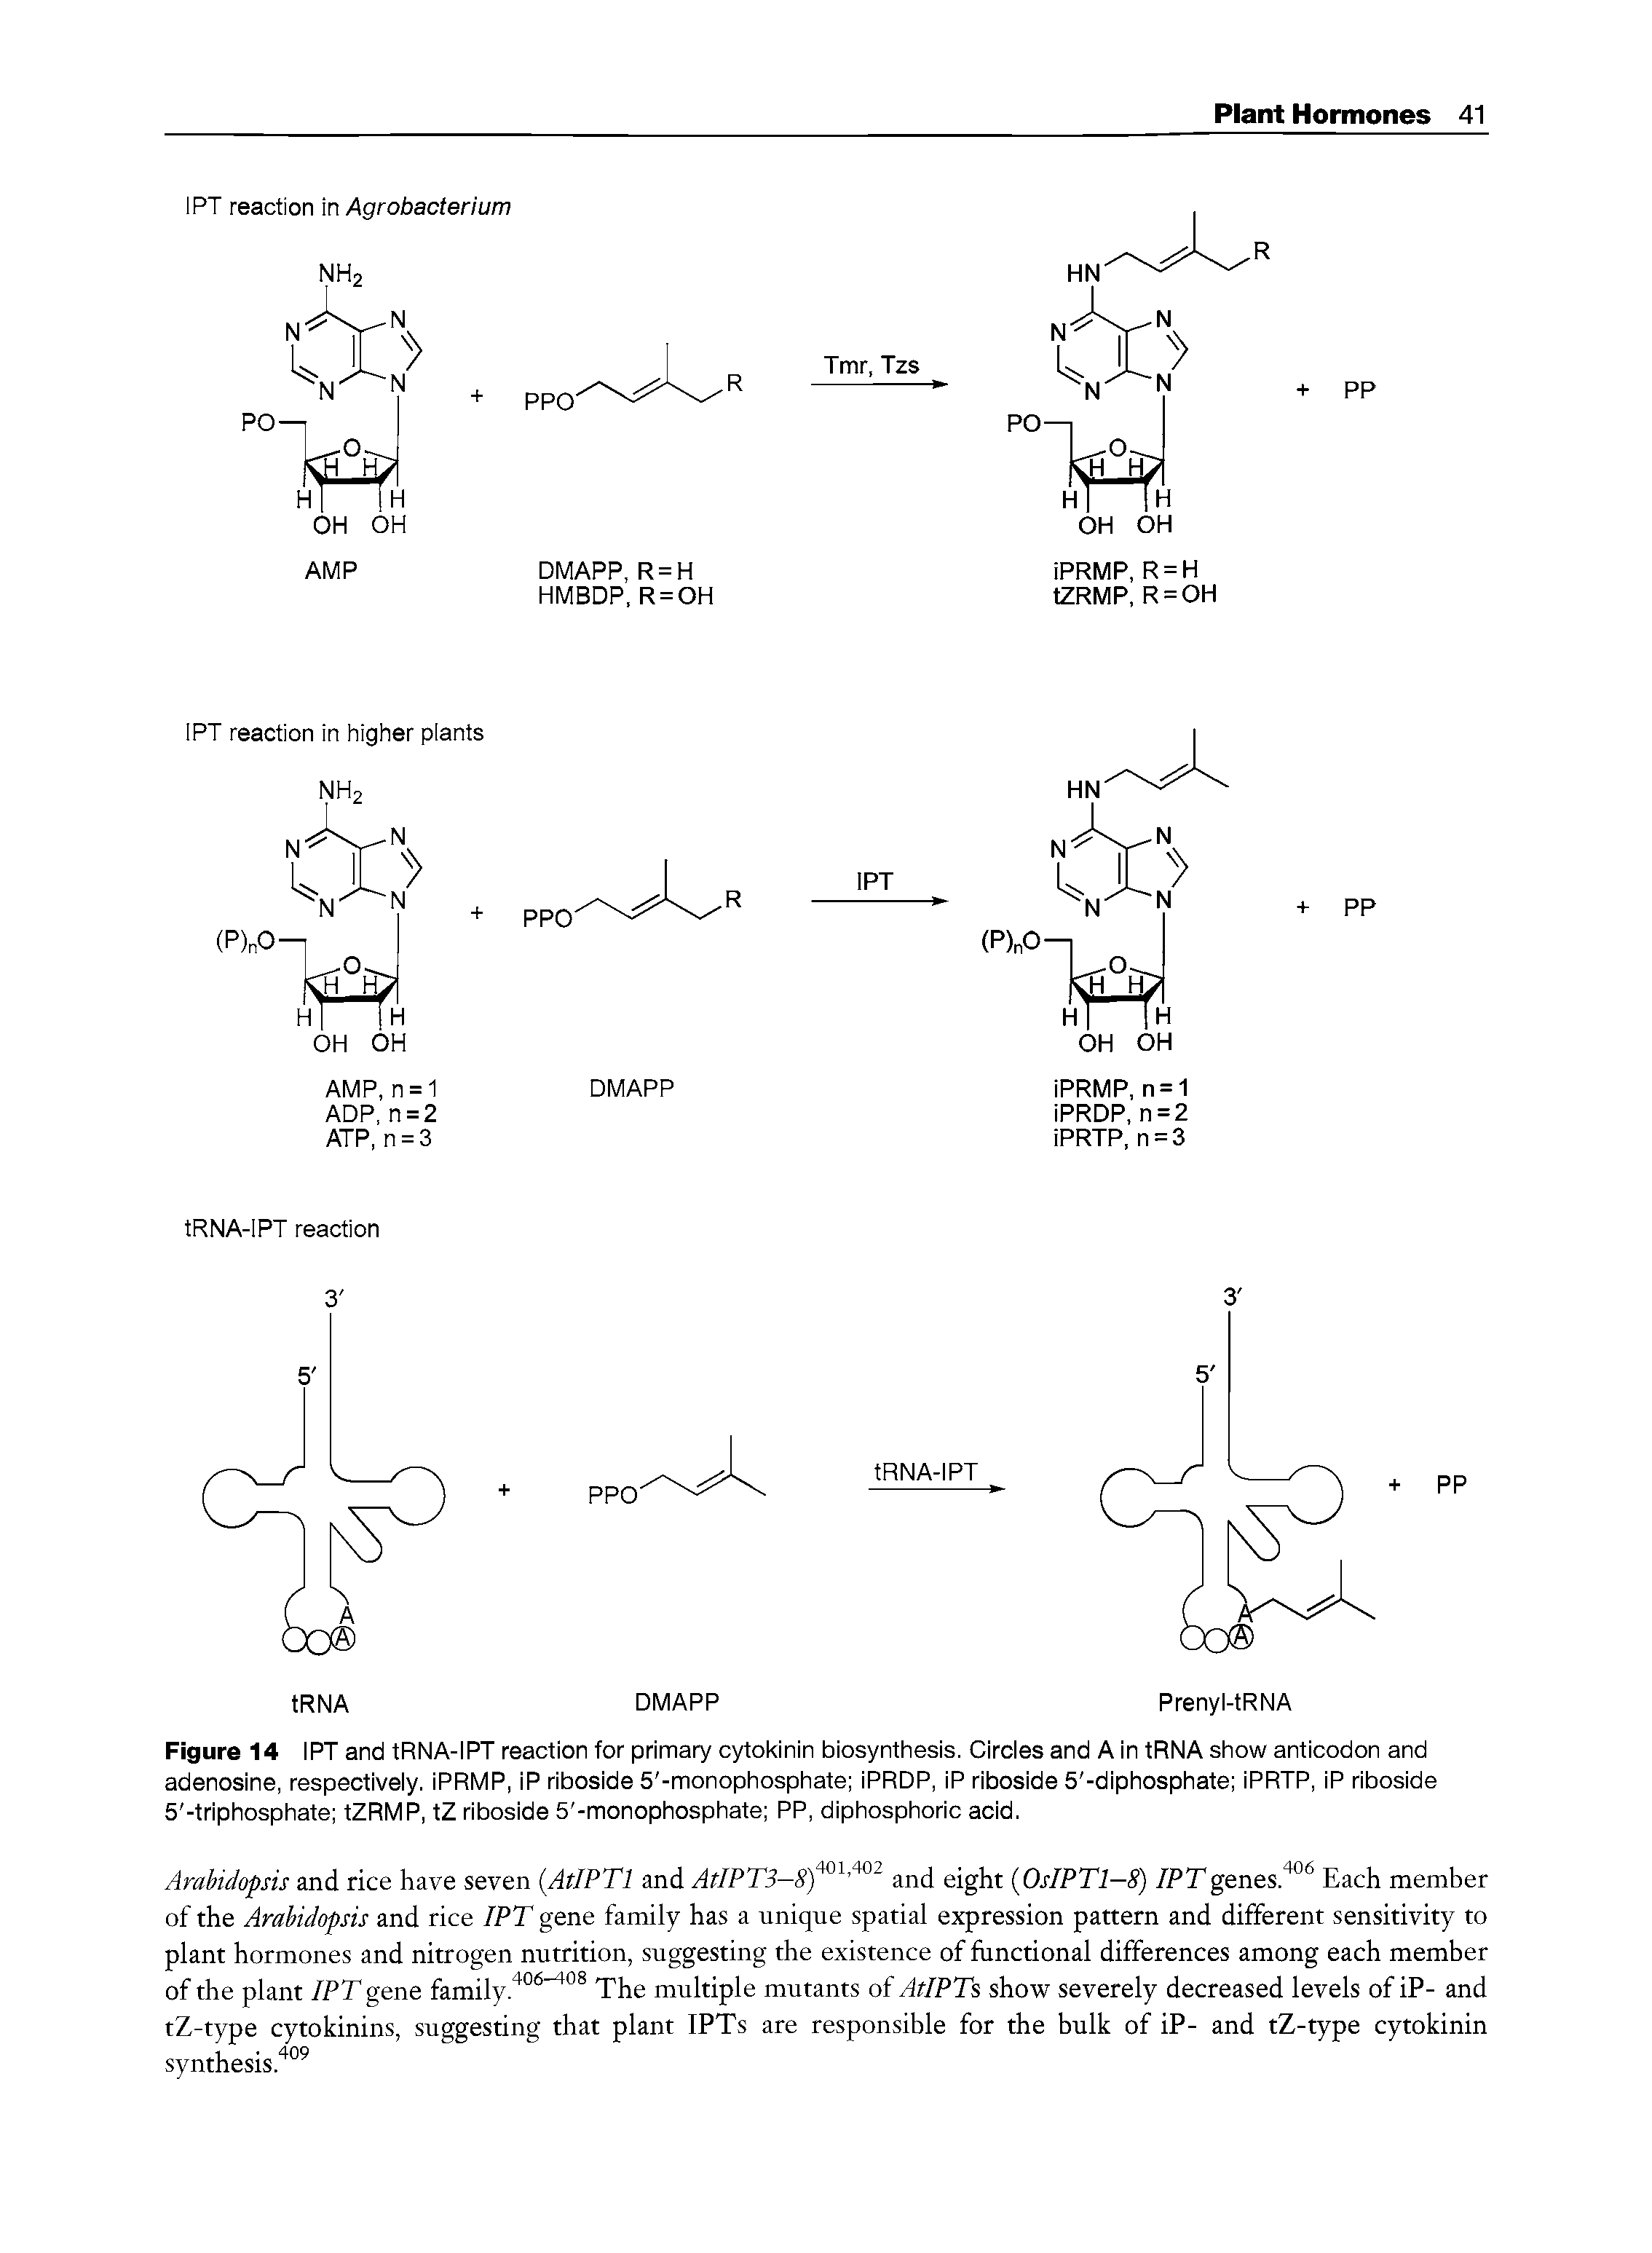 Figure 14 IPT and tRNA-IPT reaction for primary cytokinin biosynthesis. Circles and A in tRNA show anticodon and adenosine, respectively. iPRMP, iP riboside 5 -monophosphate iPRDP, iP riboside 5 -diphosphate iPRTP, iP riboside 5 -triphosphate tZRMP, tZ riboside 5 -monophosphate PP, diphosphoric acid.